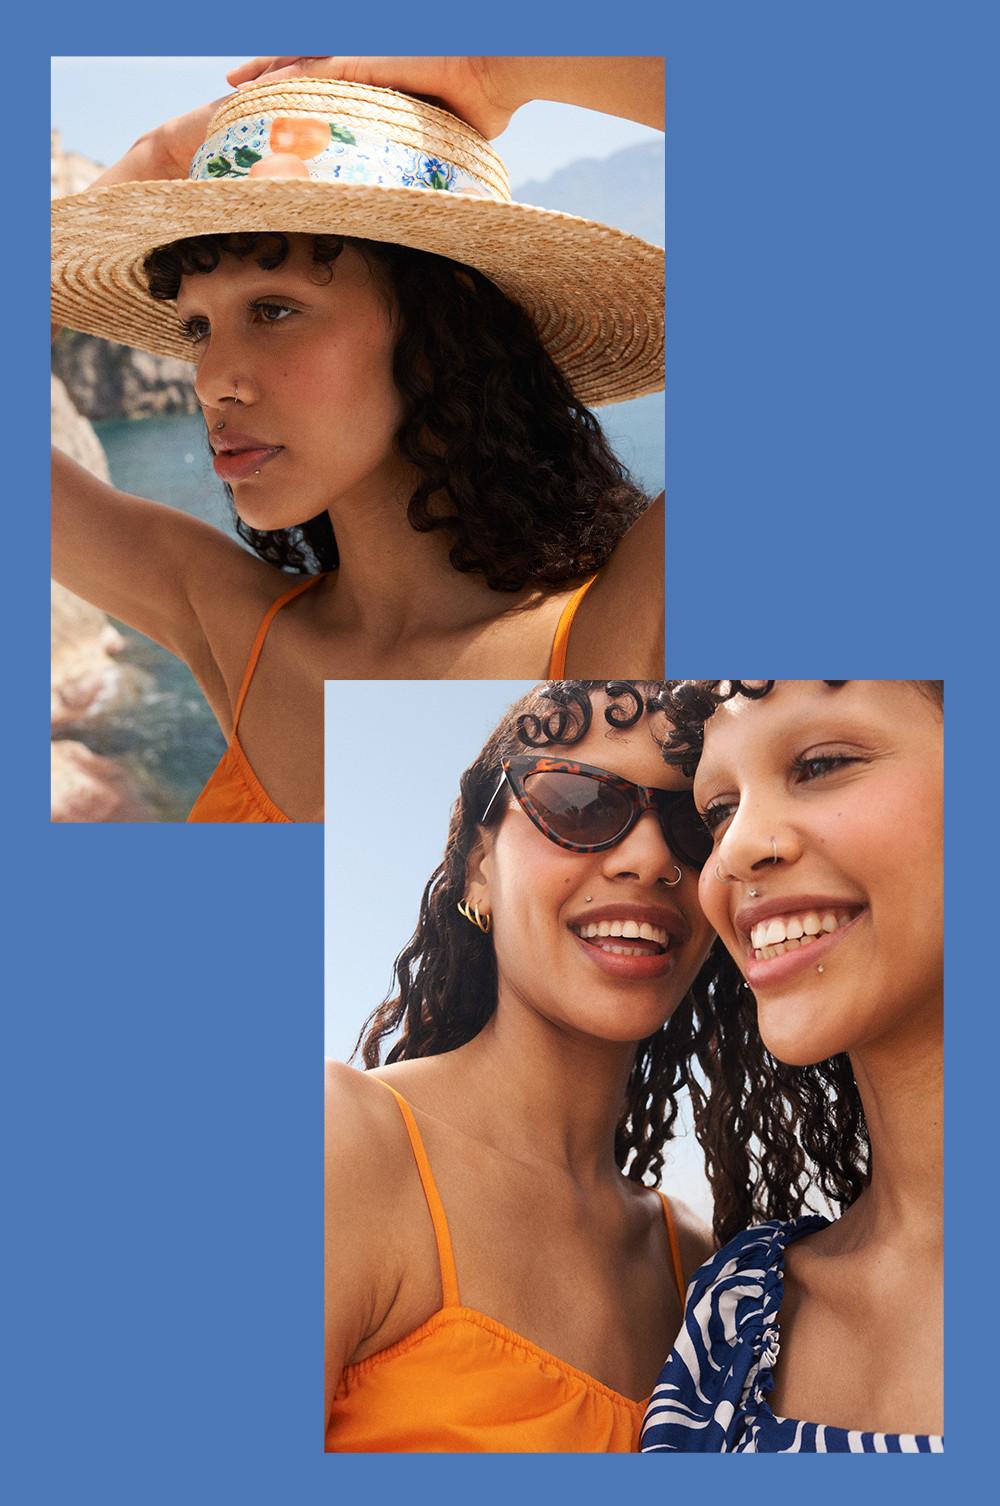 Women wearing a straw hat and sunglasses